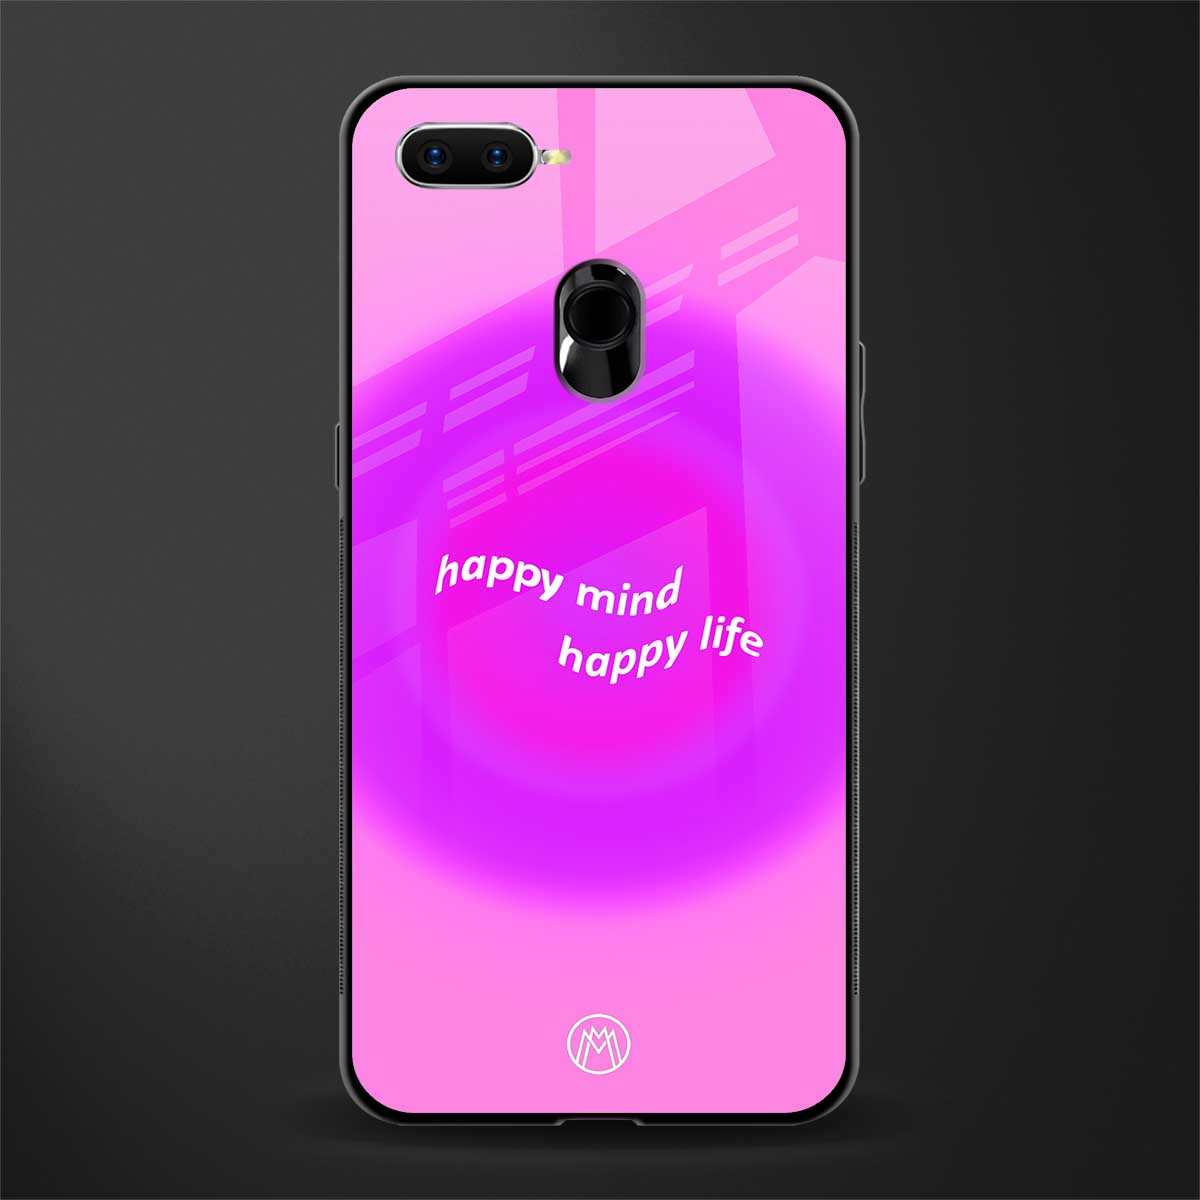 happy mind glass case for oppo a7 image